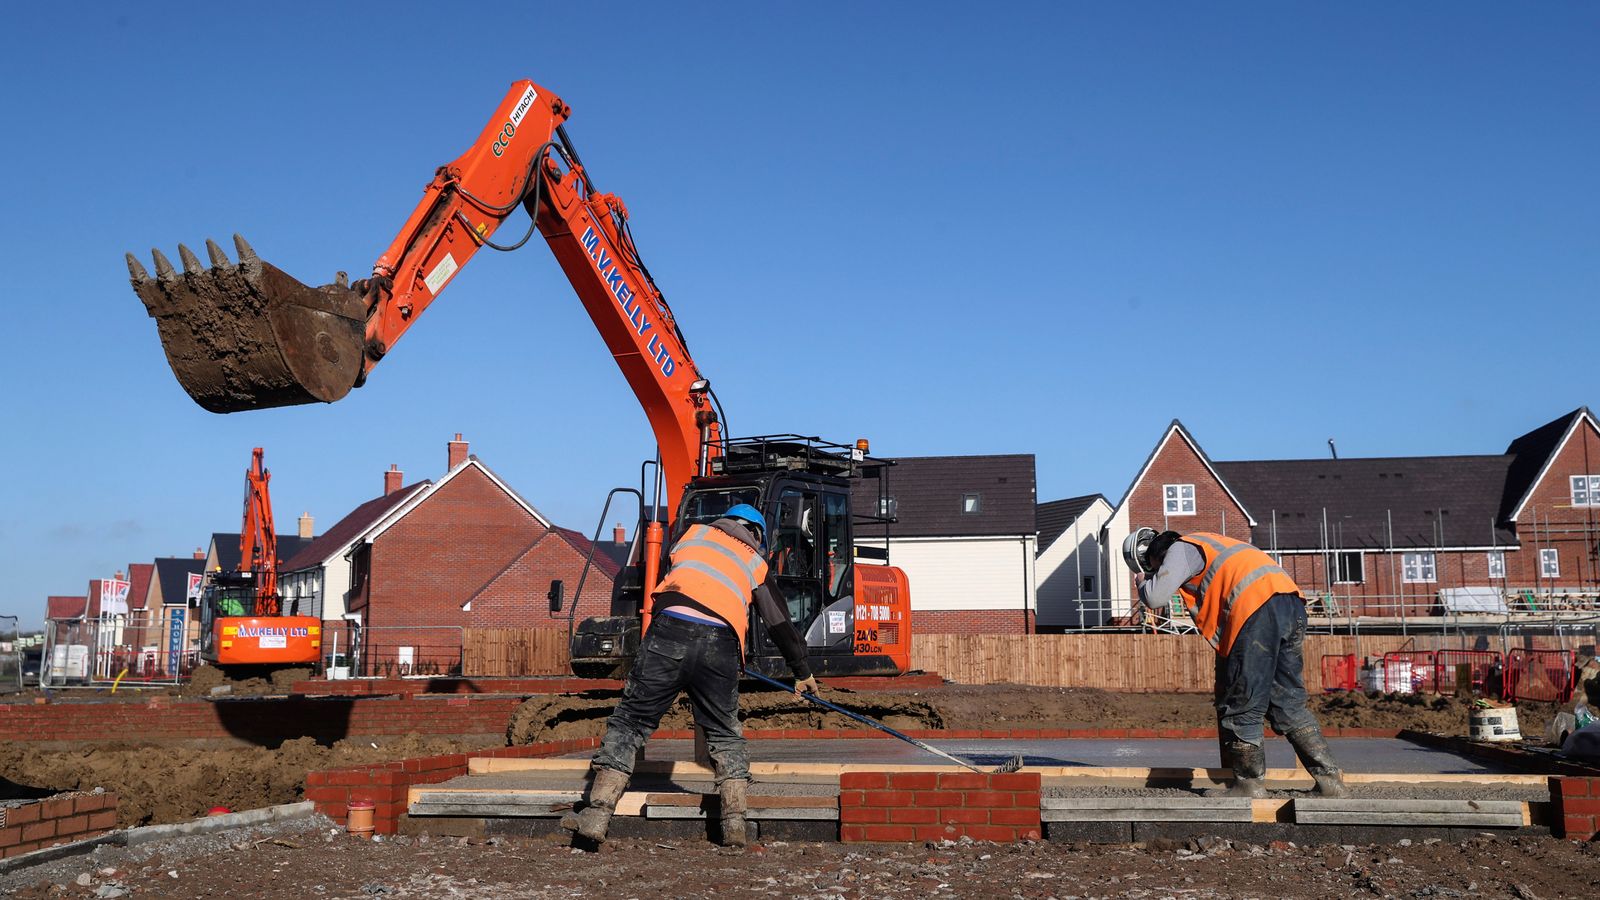 Housebuilder Taylor Wimpey gives employees £1,000 cost-of-living bonus